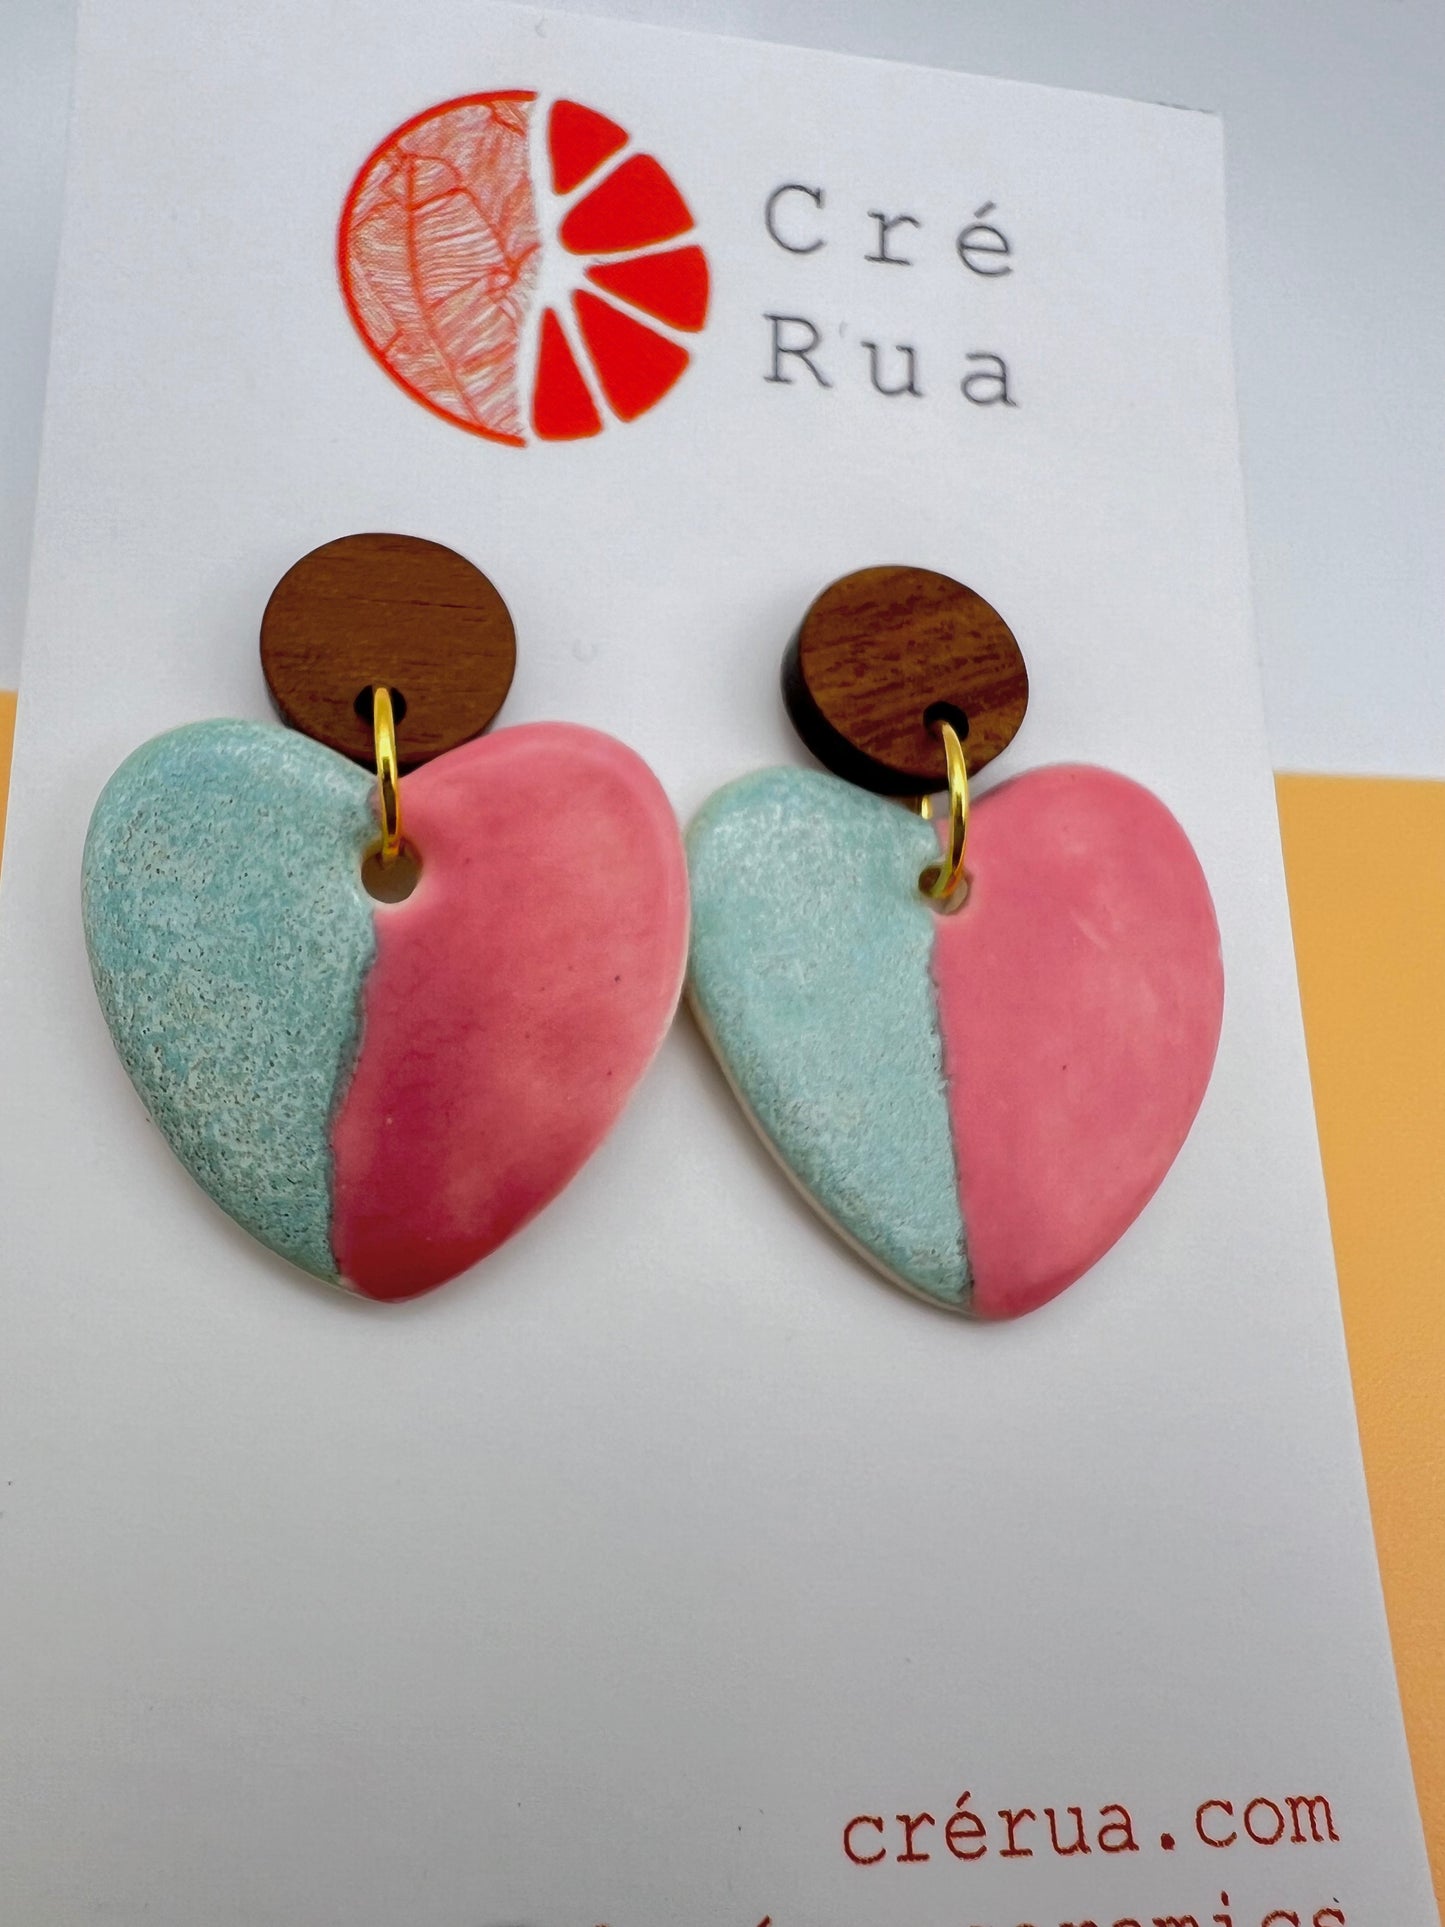 Cré Sweetheart & Wood Drop Earring - Speckled Mint & Satin Pink